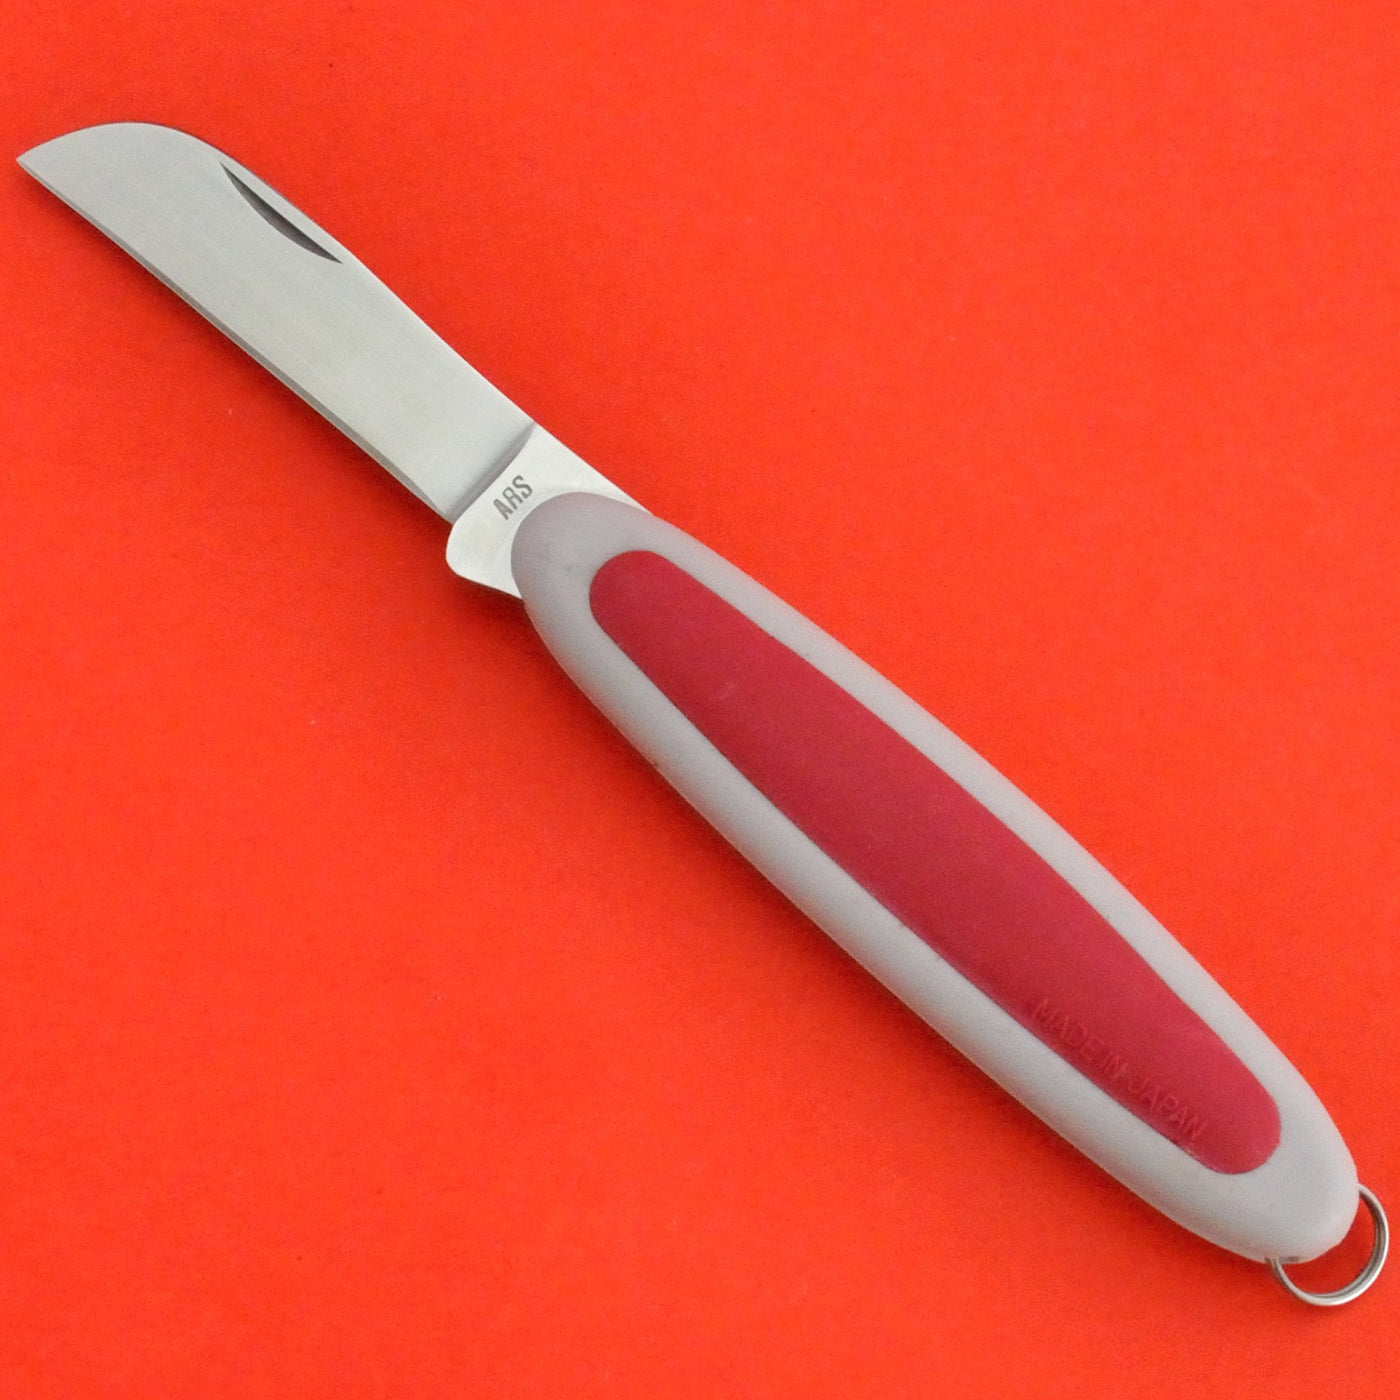 Floral Knife - Straight Folding Blade